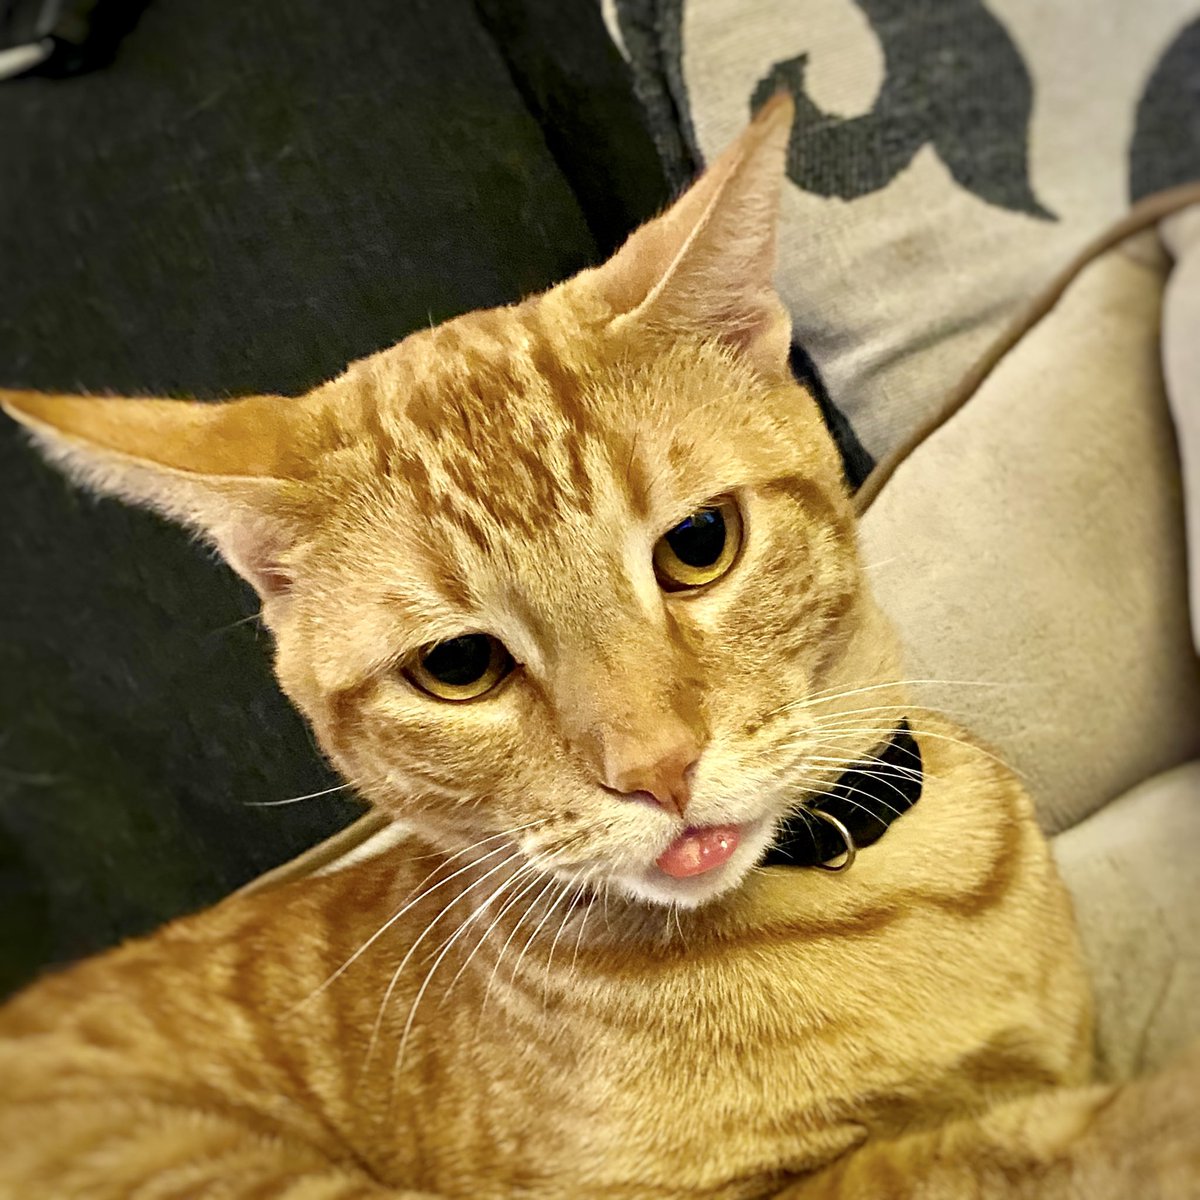 Tongue Out Tuesday! 👅 #tongueouttuesday #tongueout #cattongue #mycatisweird #gingercat #orangetabby #cat #cats #CatsOfTwitter